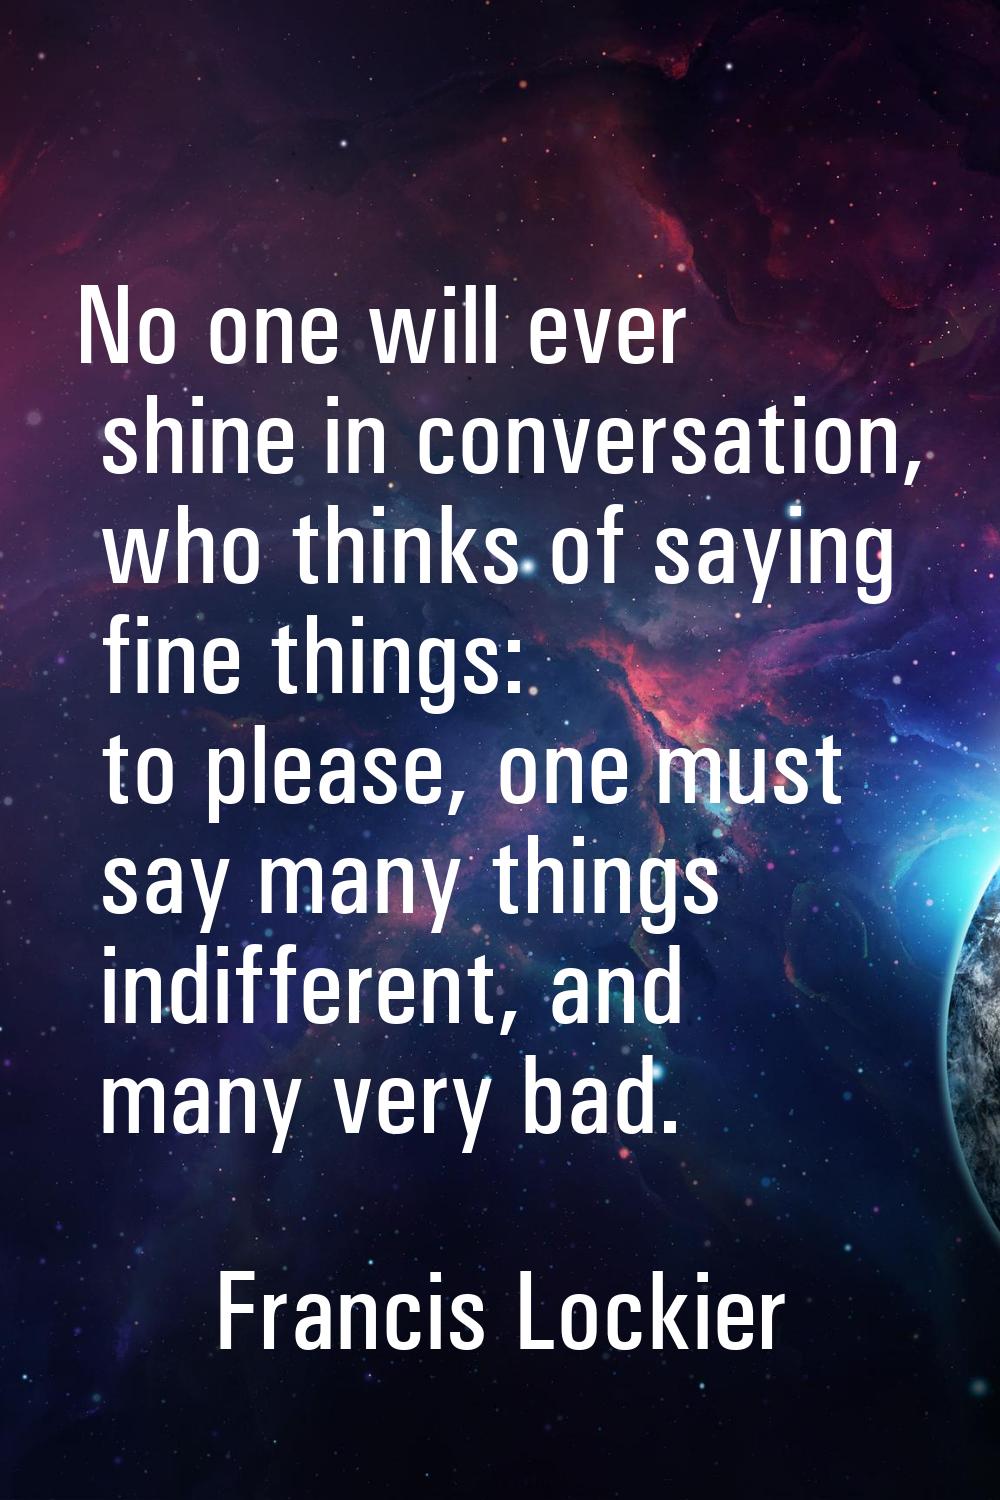 No one will ever shine in conversation, who thinks of saying fine things: to please, one must say m